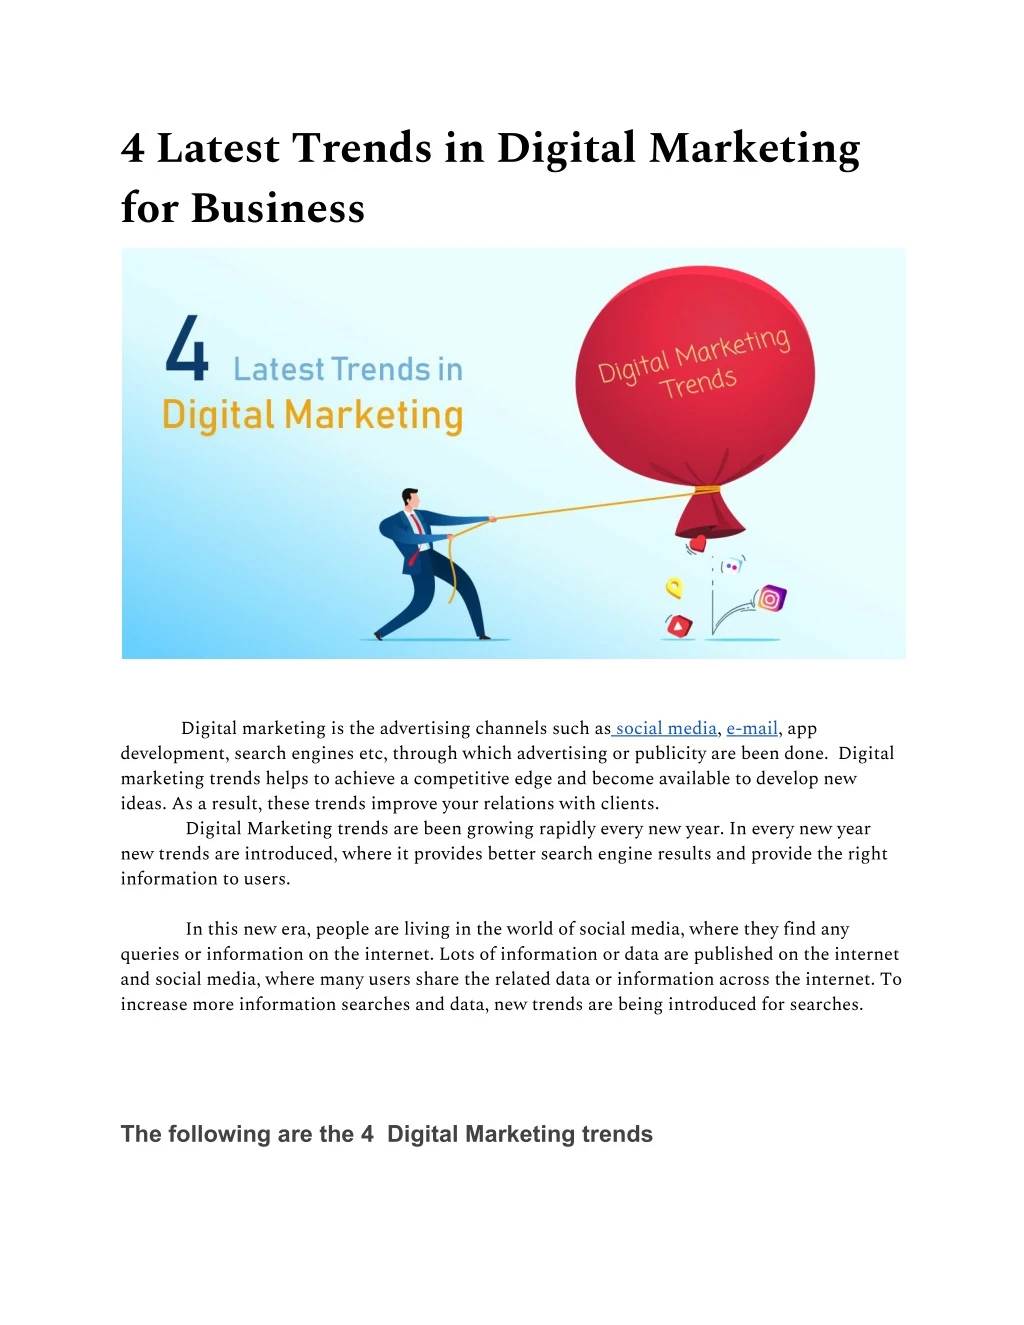 4 latest trends in digital marketing for business